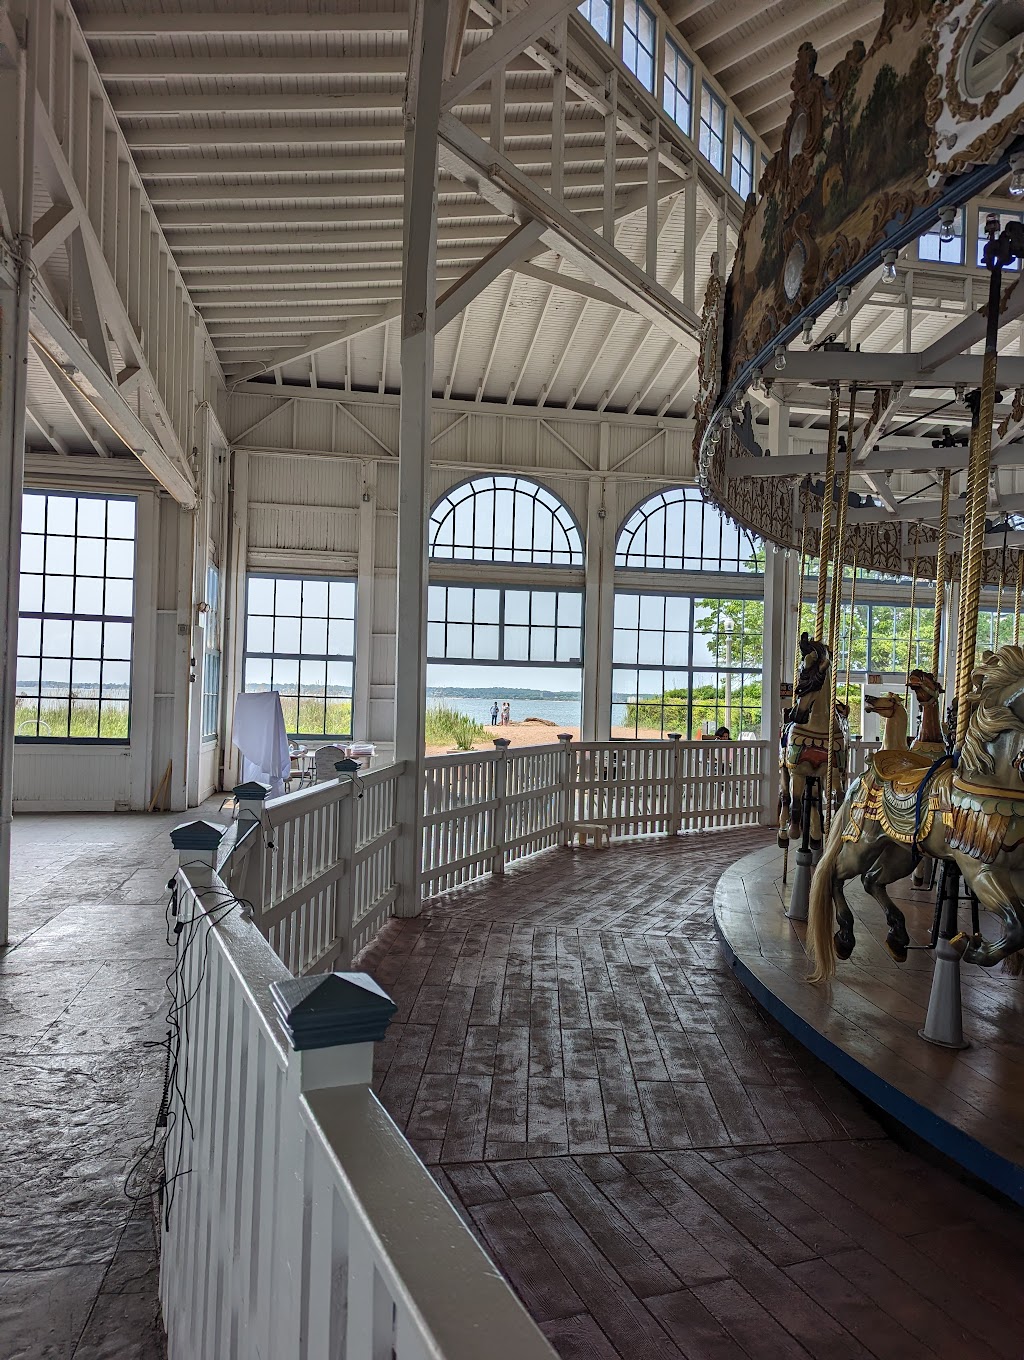 Lighthouse Point Park Carousel | 040 0845 00100, New Haven, CT 06512 | Phone: (203) 946-8027